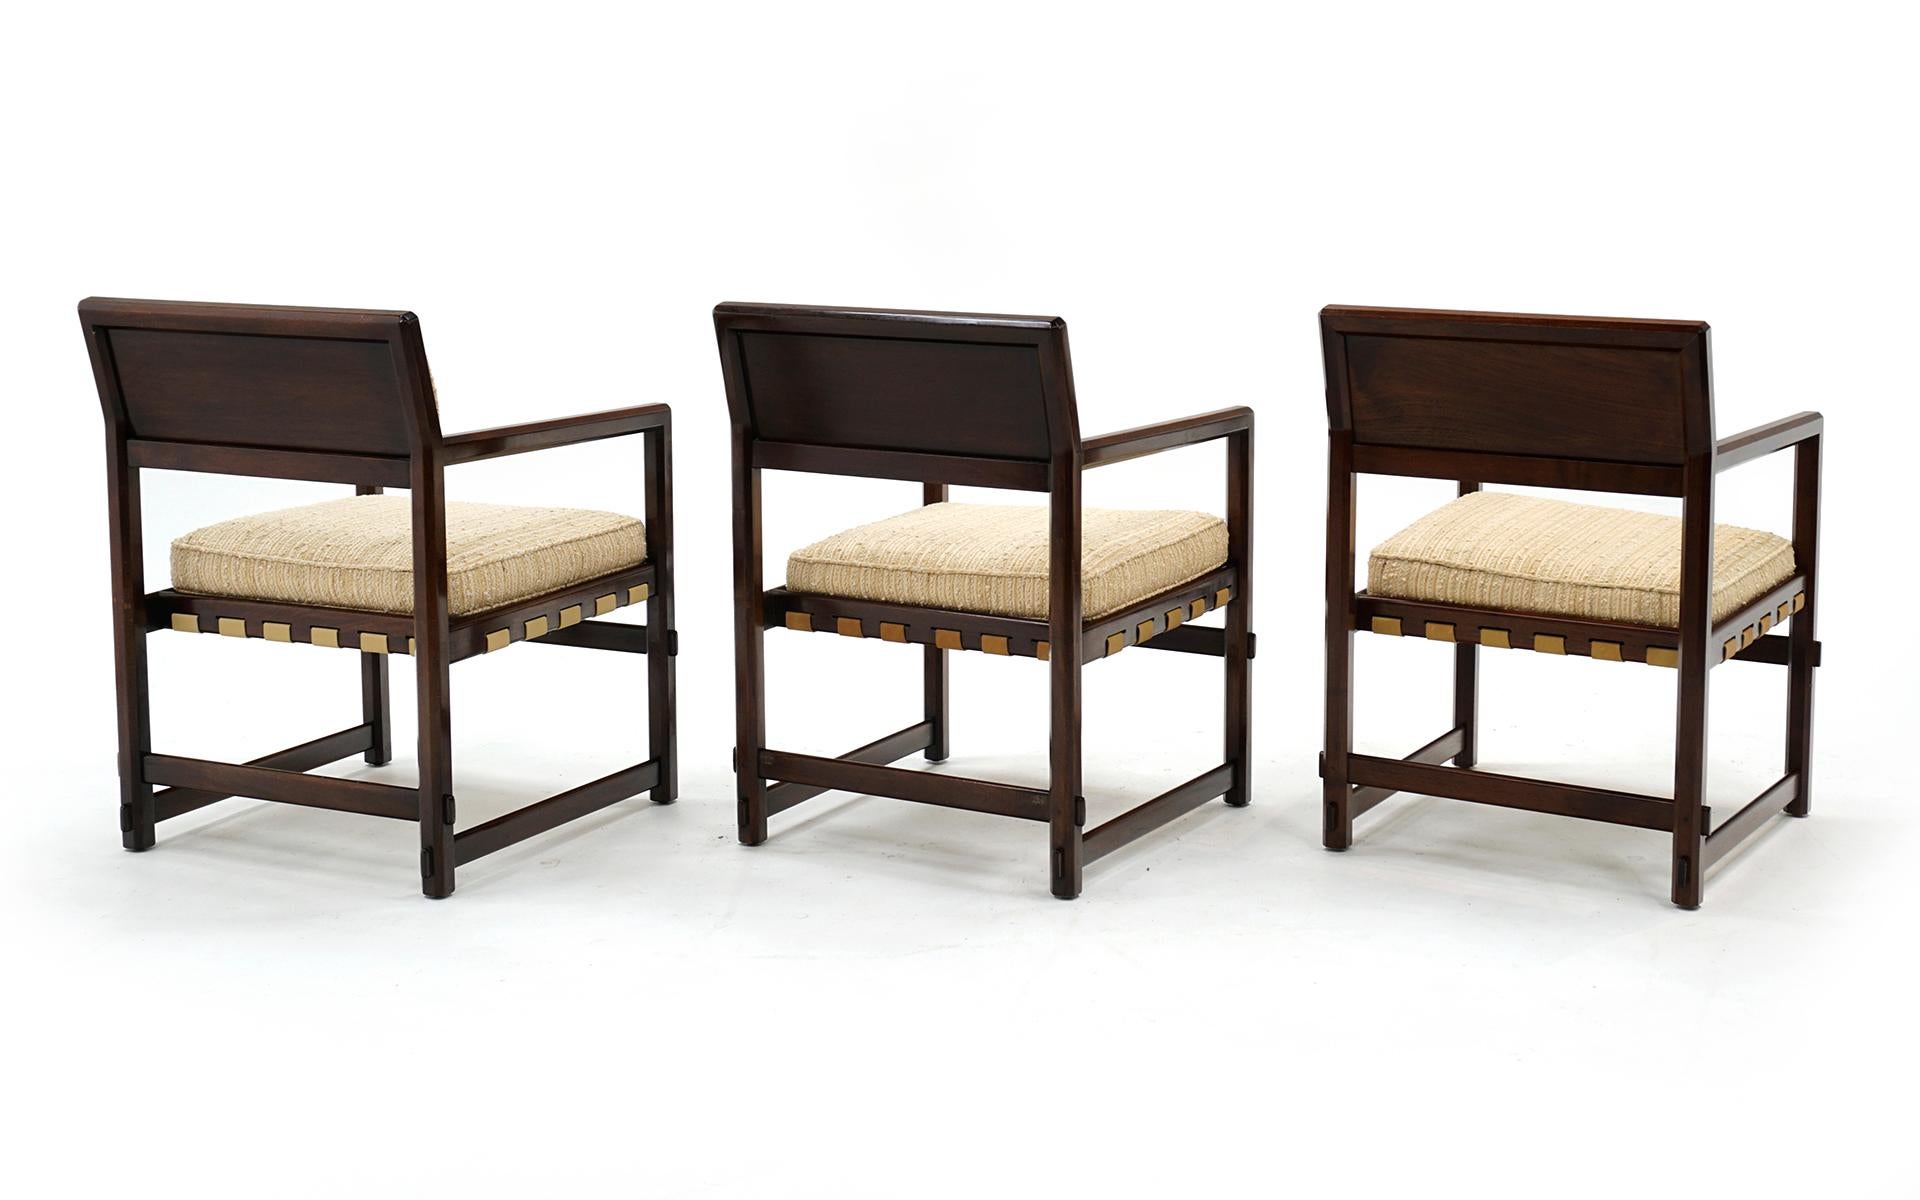 American Six Dining Chairs with Arms by Edward Wormley for Dunbar